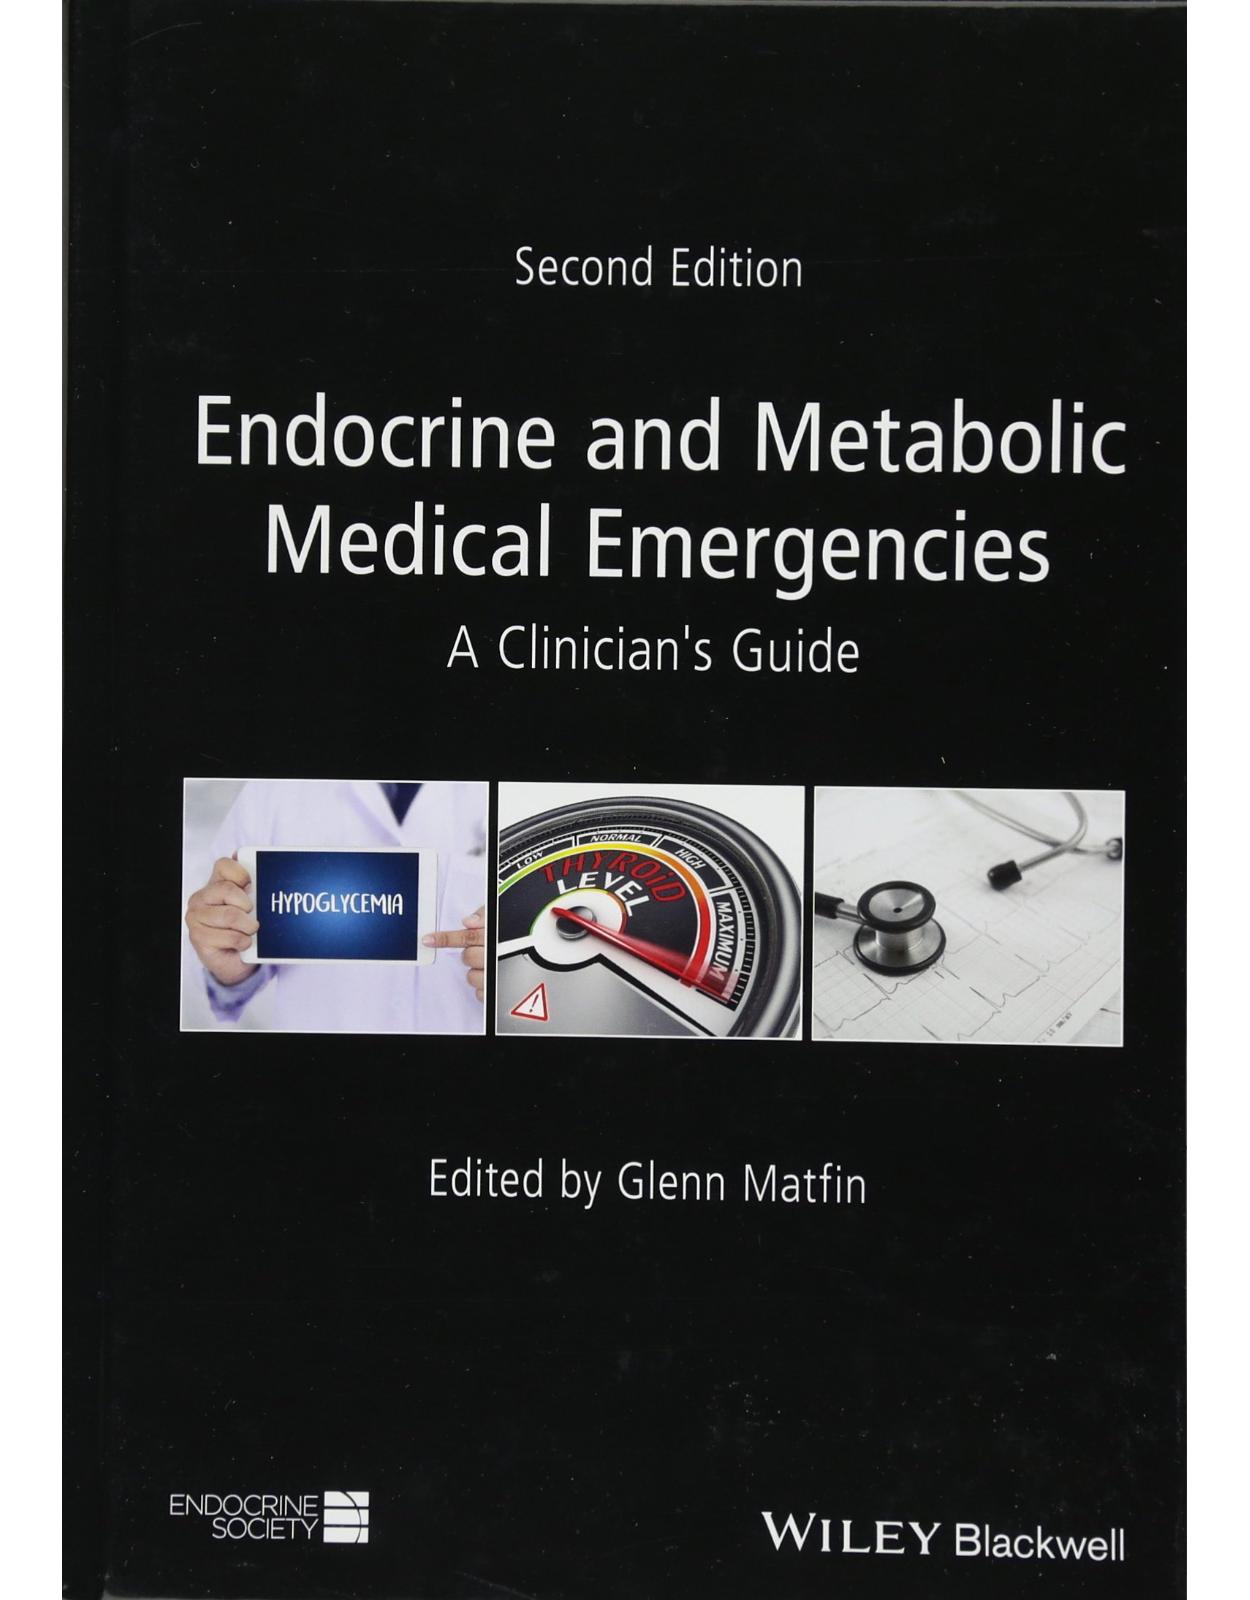 Endocrine and Metabolic Medical Emergencies: A Clinician's Guide 